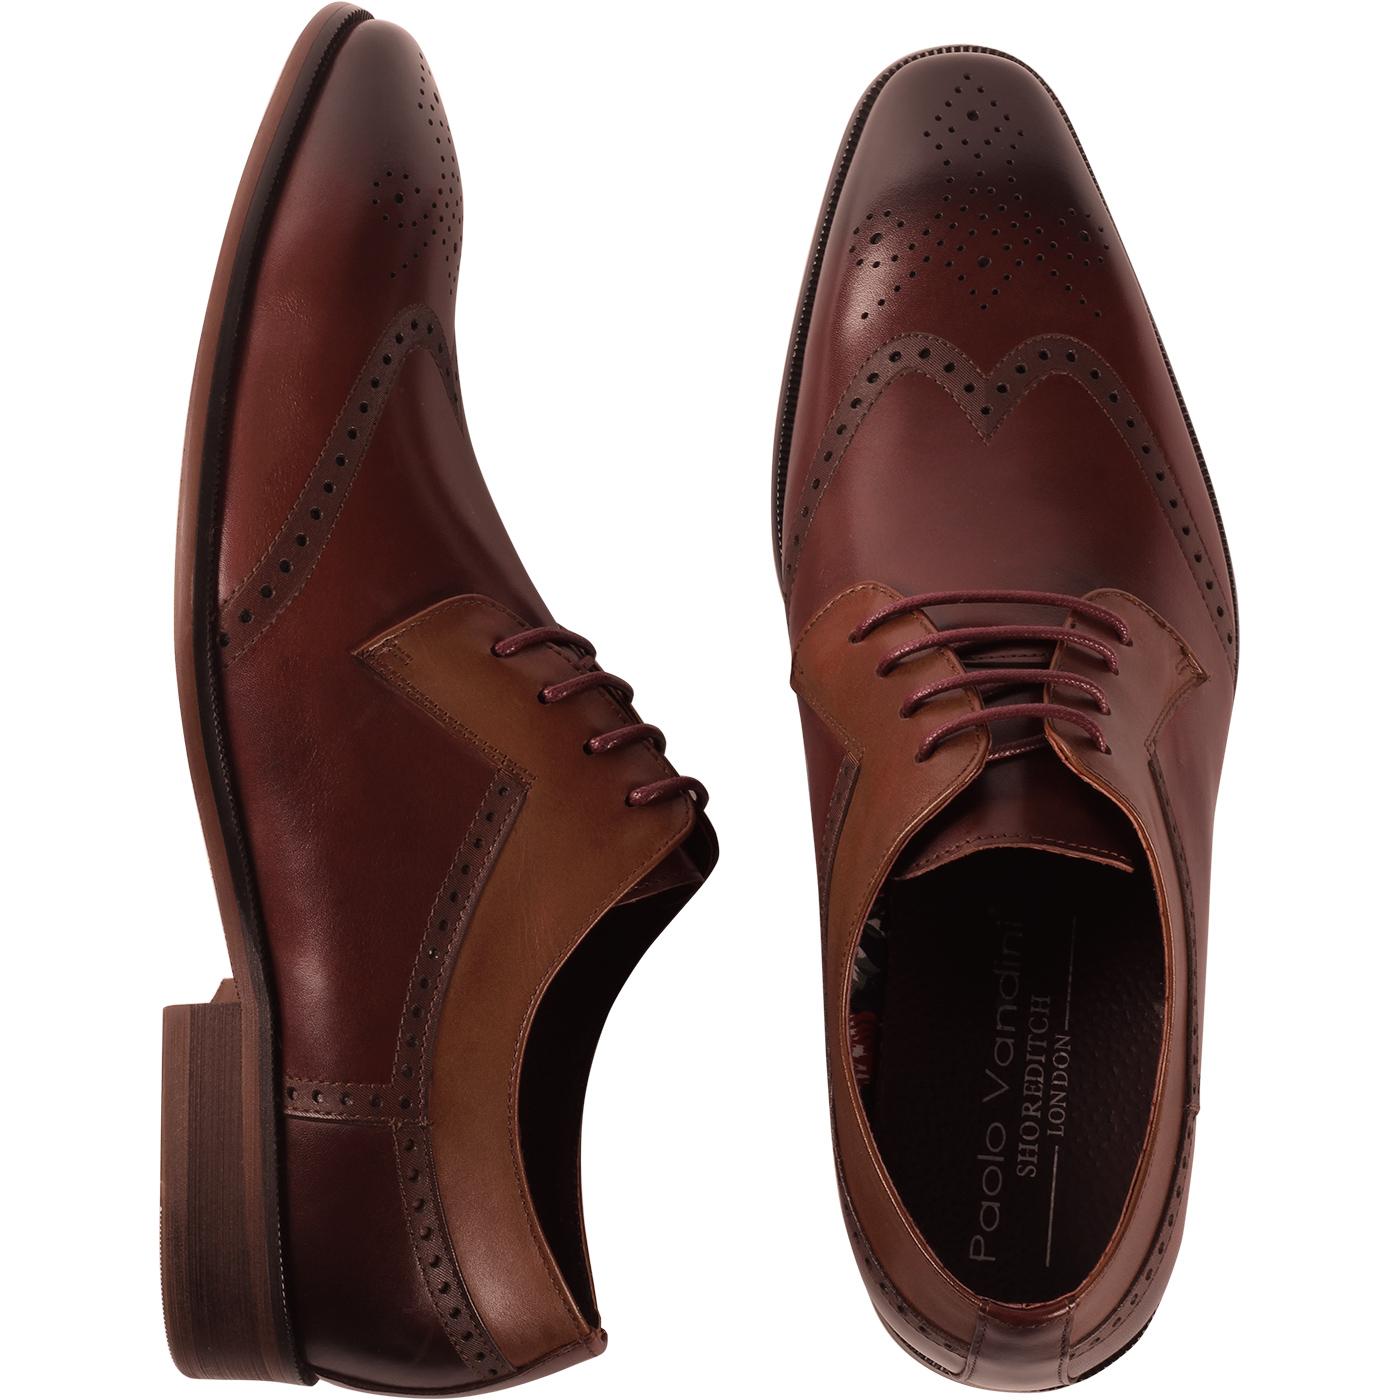 PAOLO VANDINI Nyland Cuff Tri-Colour Brogue Shoes in Wine